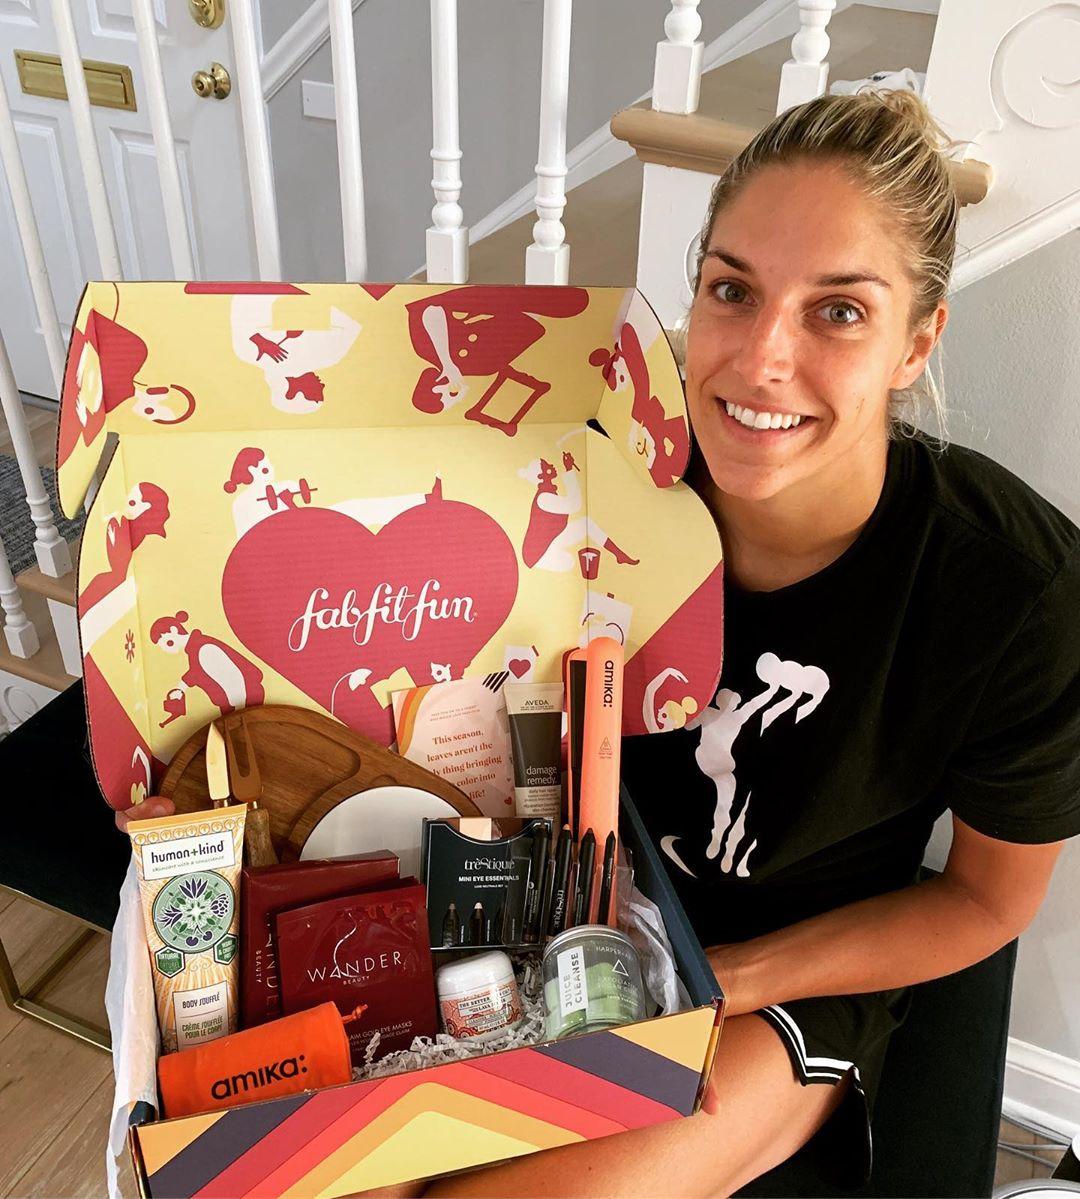 51 Hot Pictures Of Elena Delle Donne Are Sure To Leave You Baffled 6